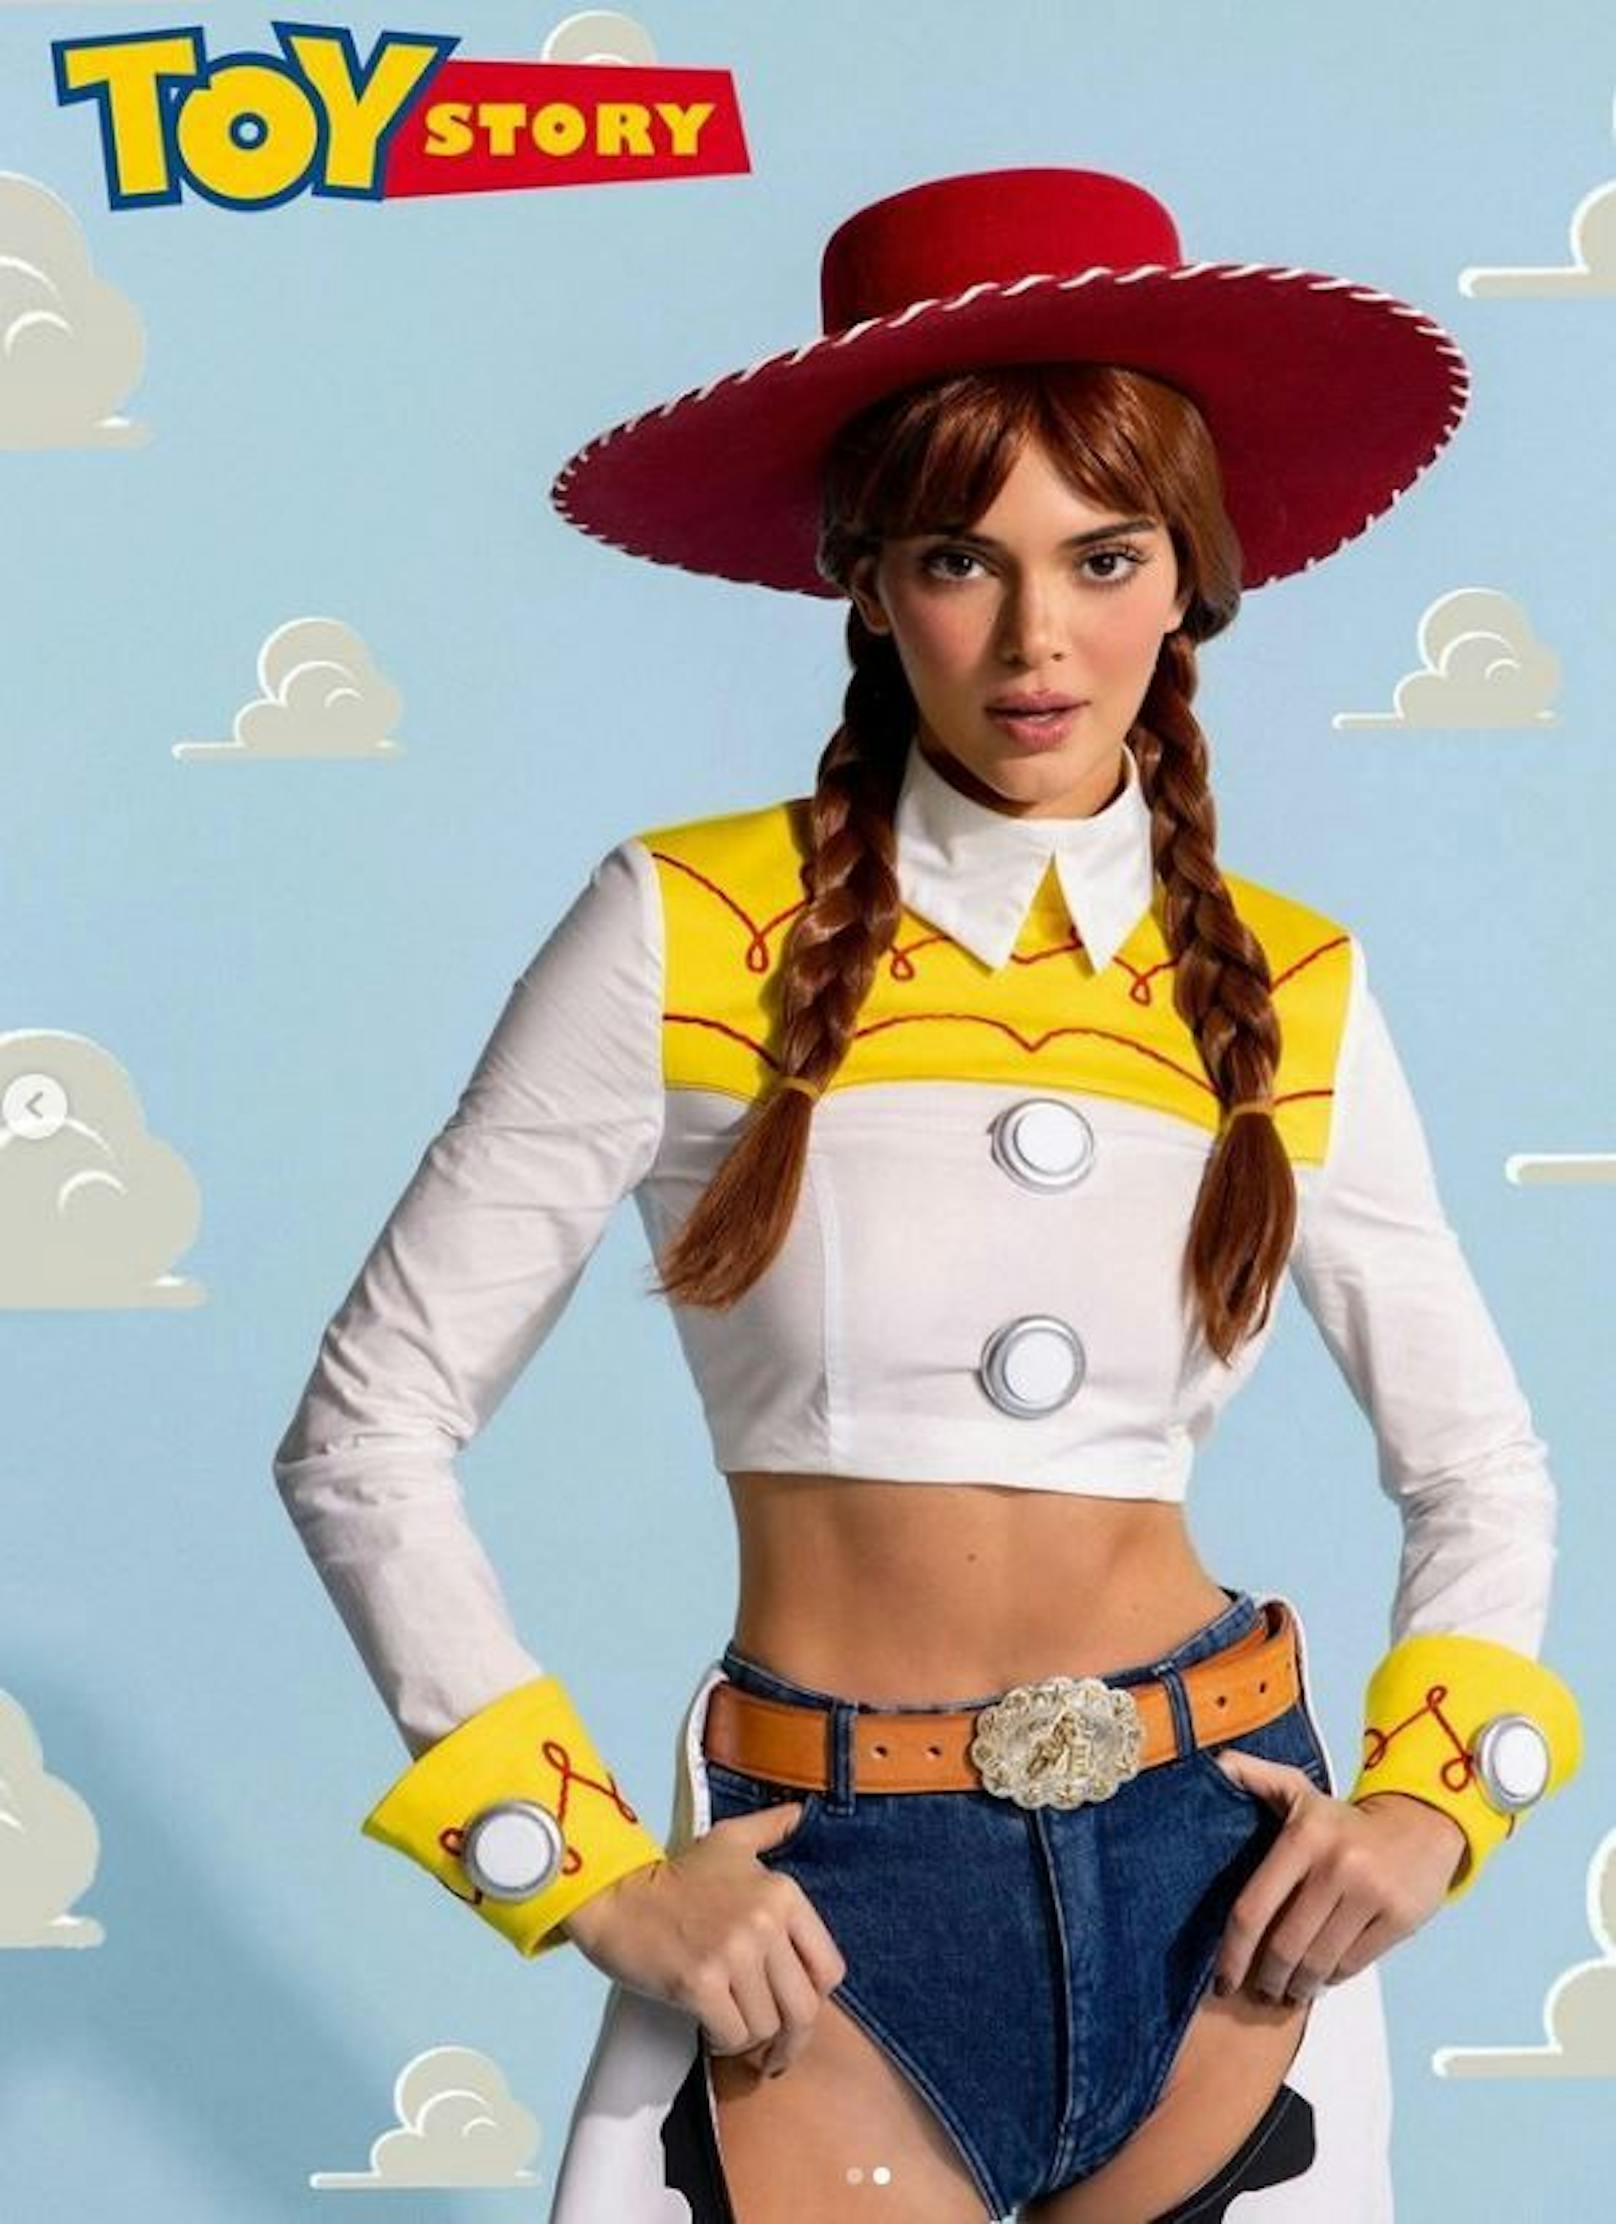 Kendall Jenner als Woody von Toystory